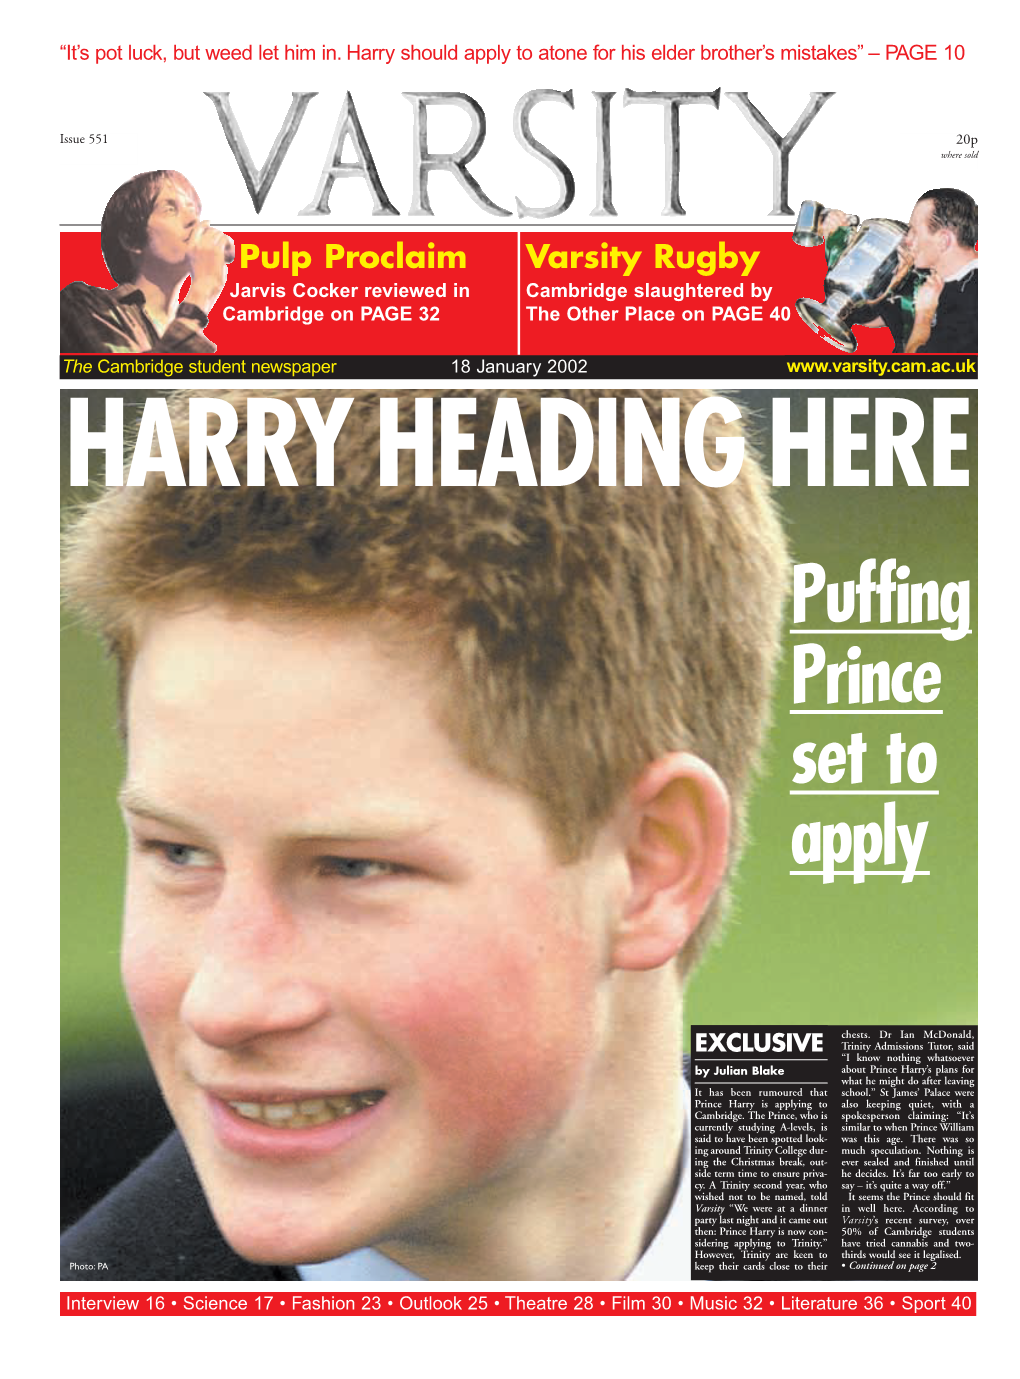 Puffing Prince Set to Apply